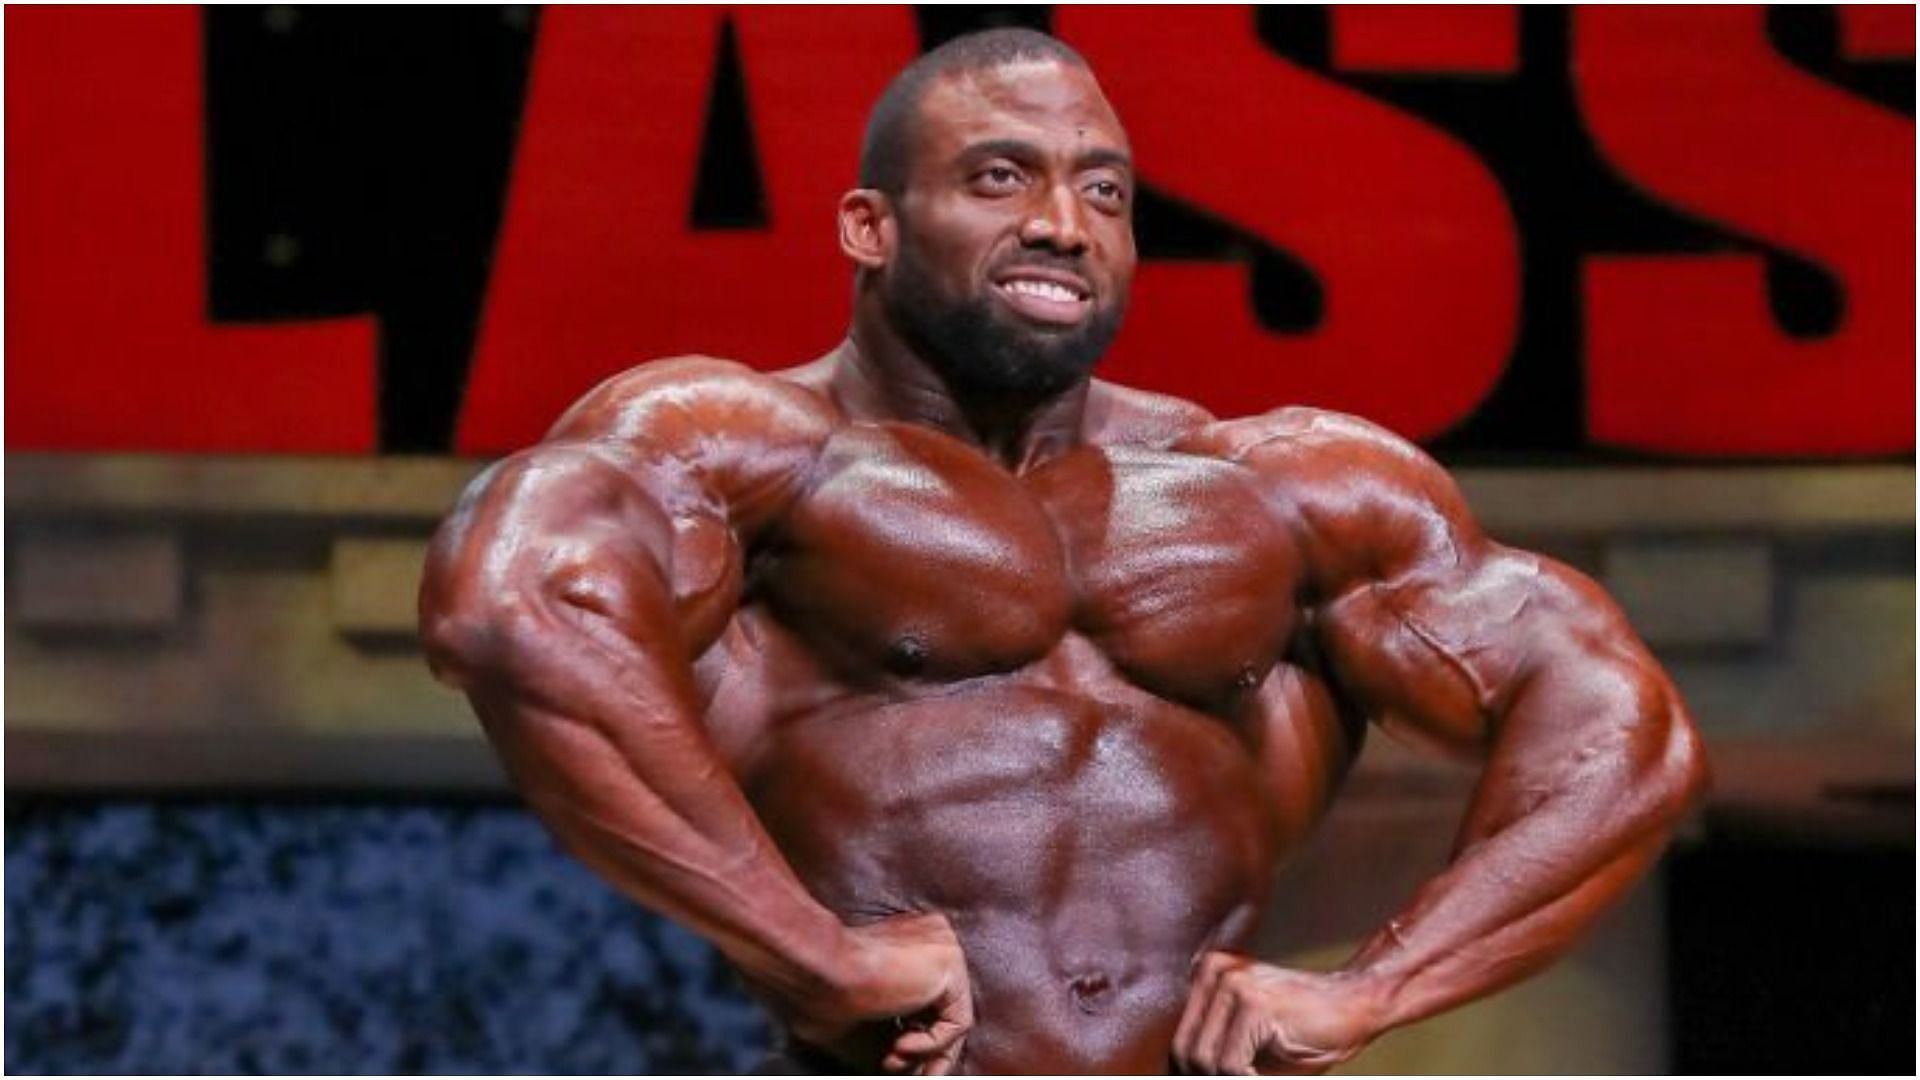 Cedric McMillan recently died at the age of 44 (Image via Frank Jansky/Gett...